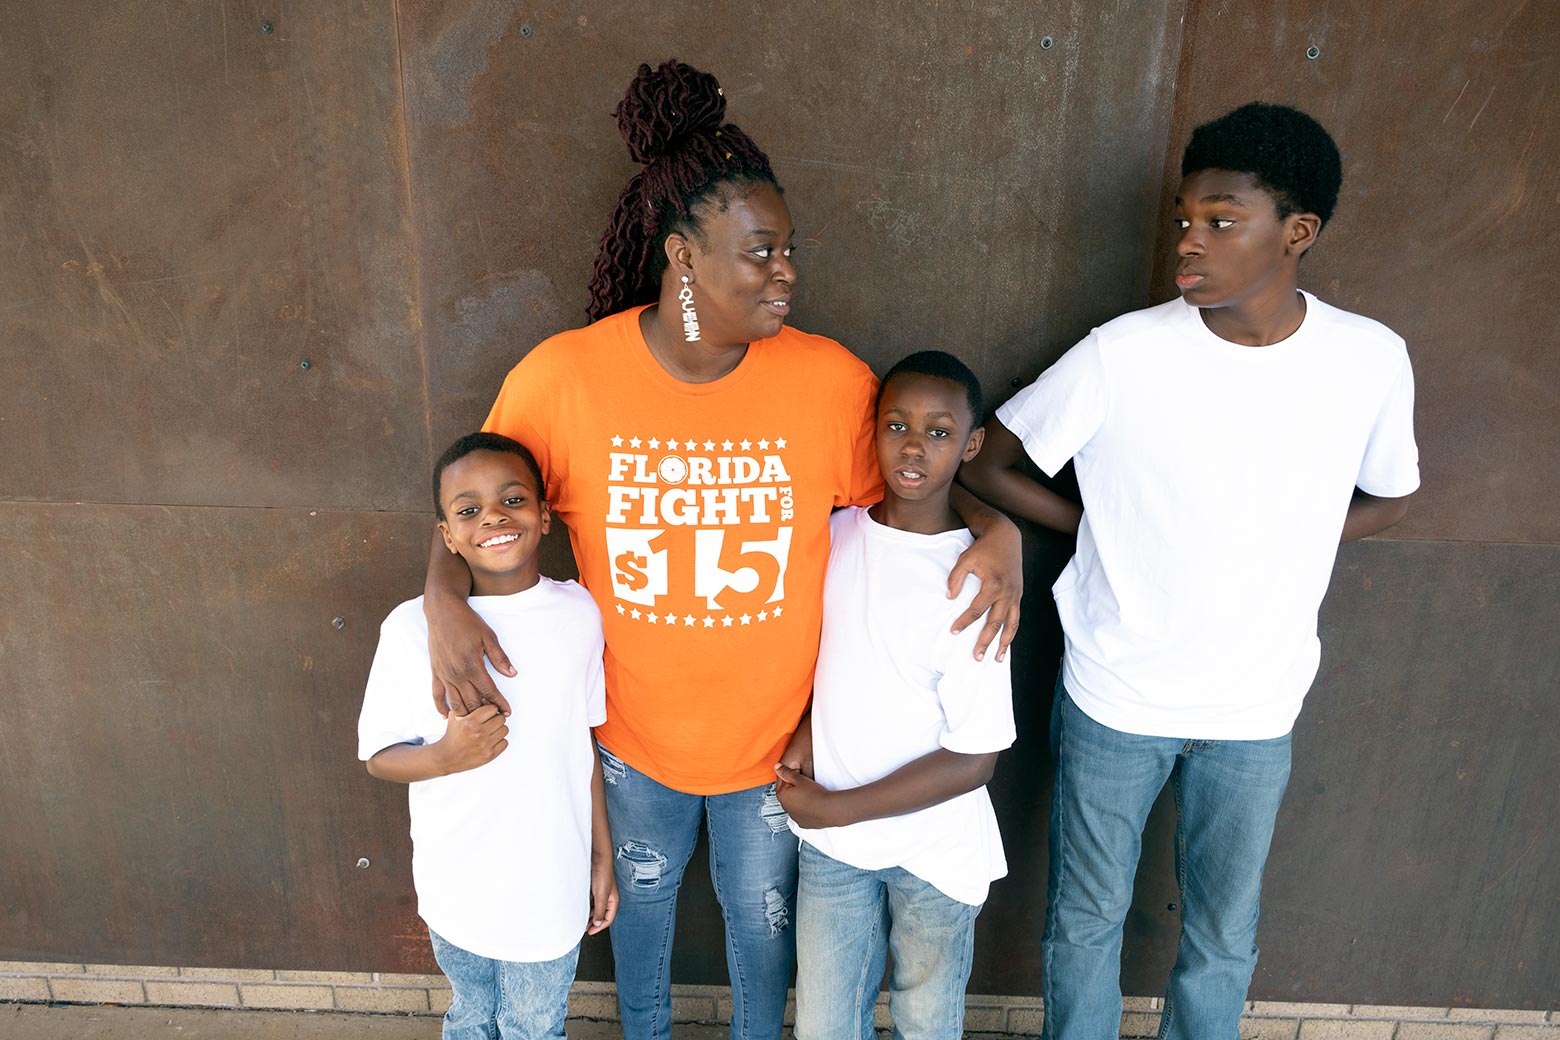 Monica smiles and stands with her three sons, with her arms around two of them